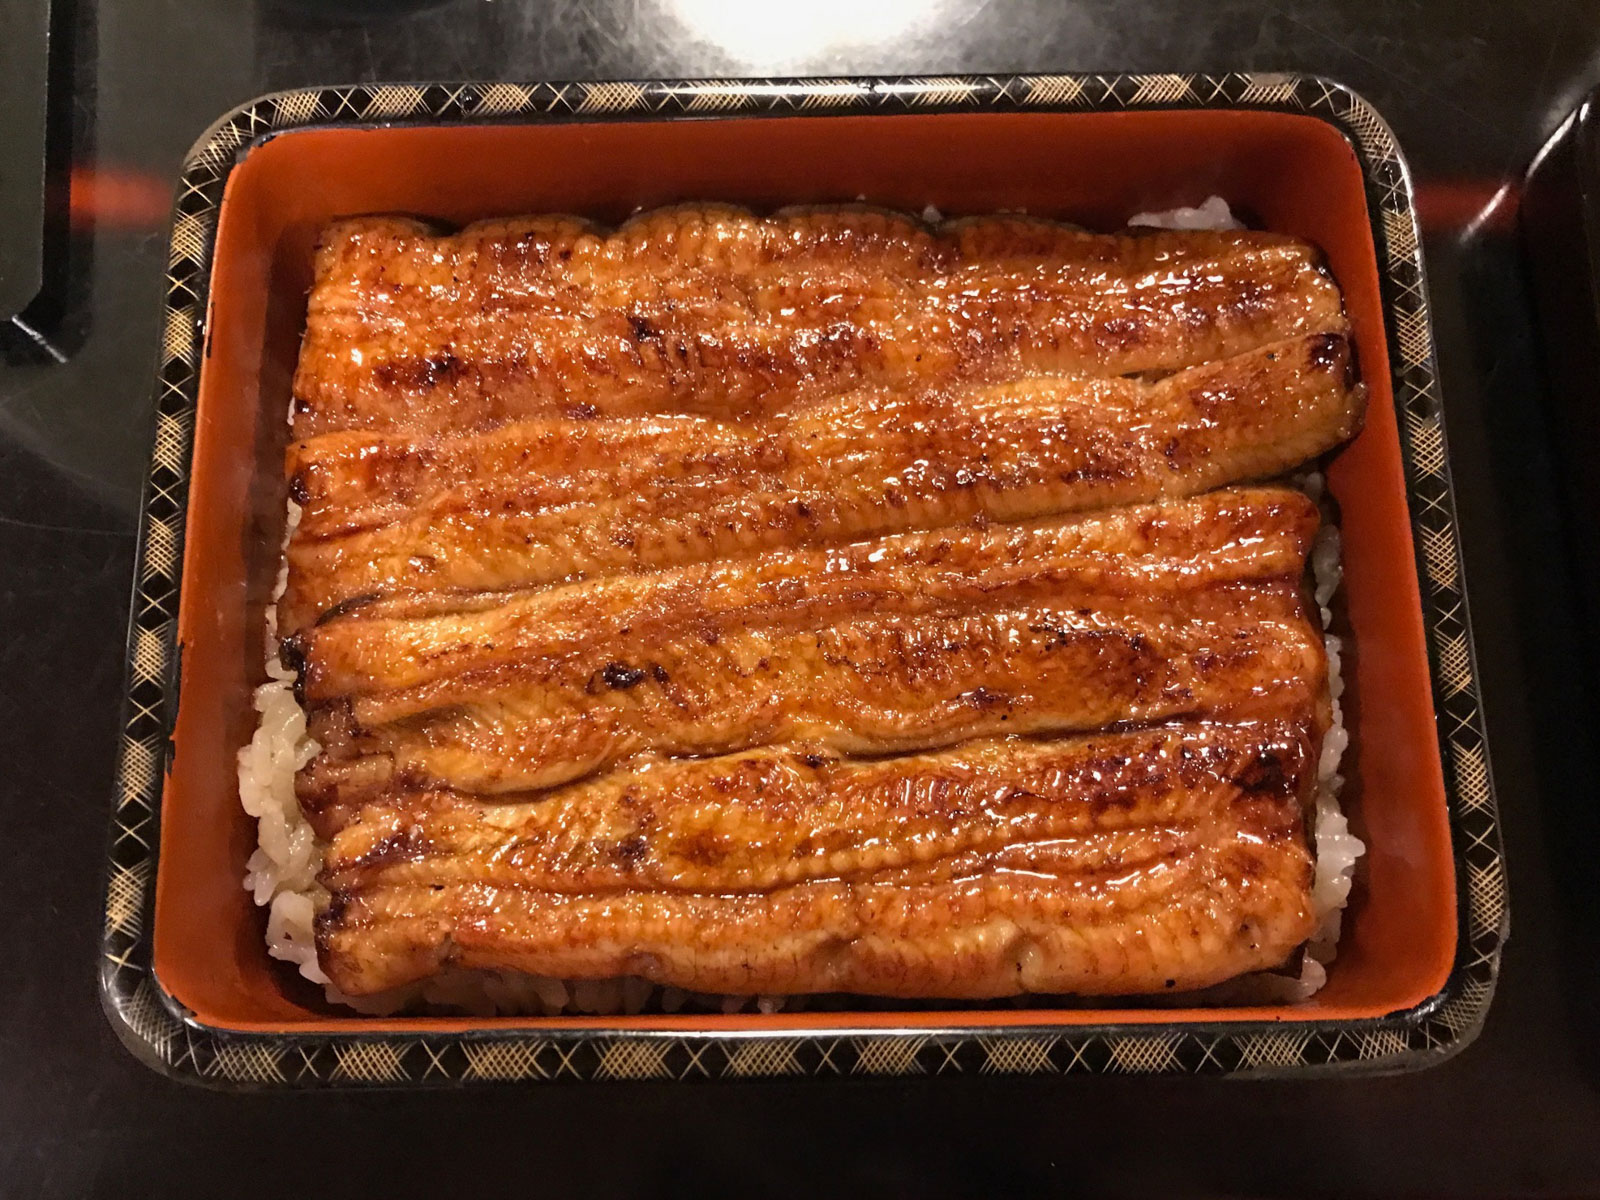 A rectangular box filled with slices of grilled eel, golden brown in colour. Some white rice can be seen underneath the eel. The interior of the box is a dark orange-red, and the rim has a gold and black pattern.